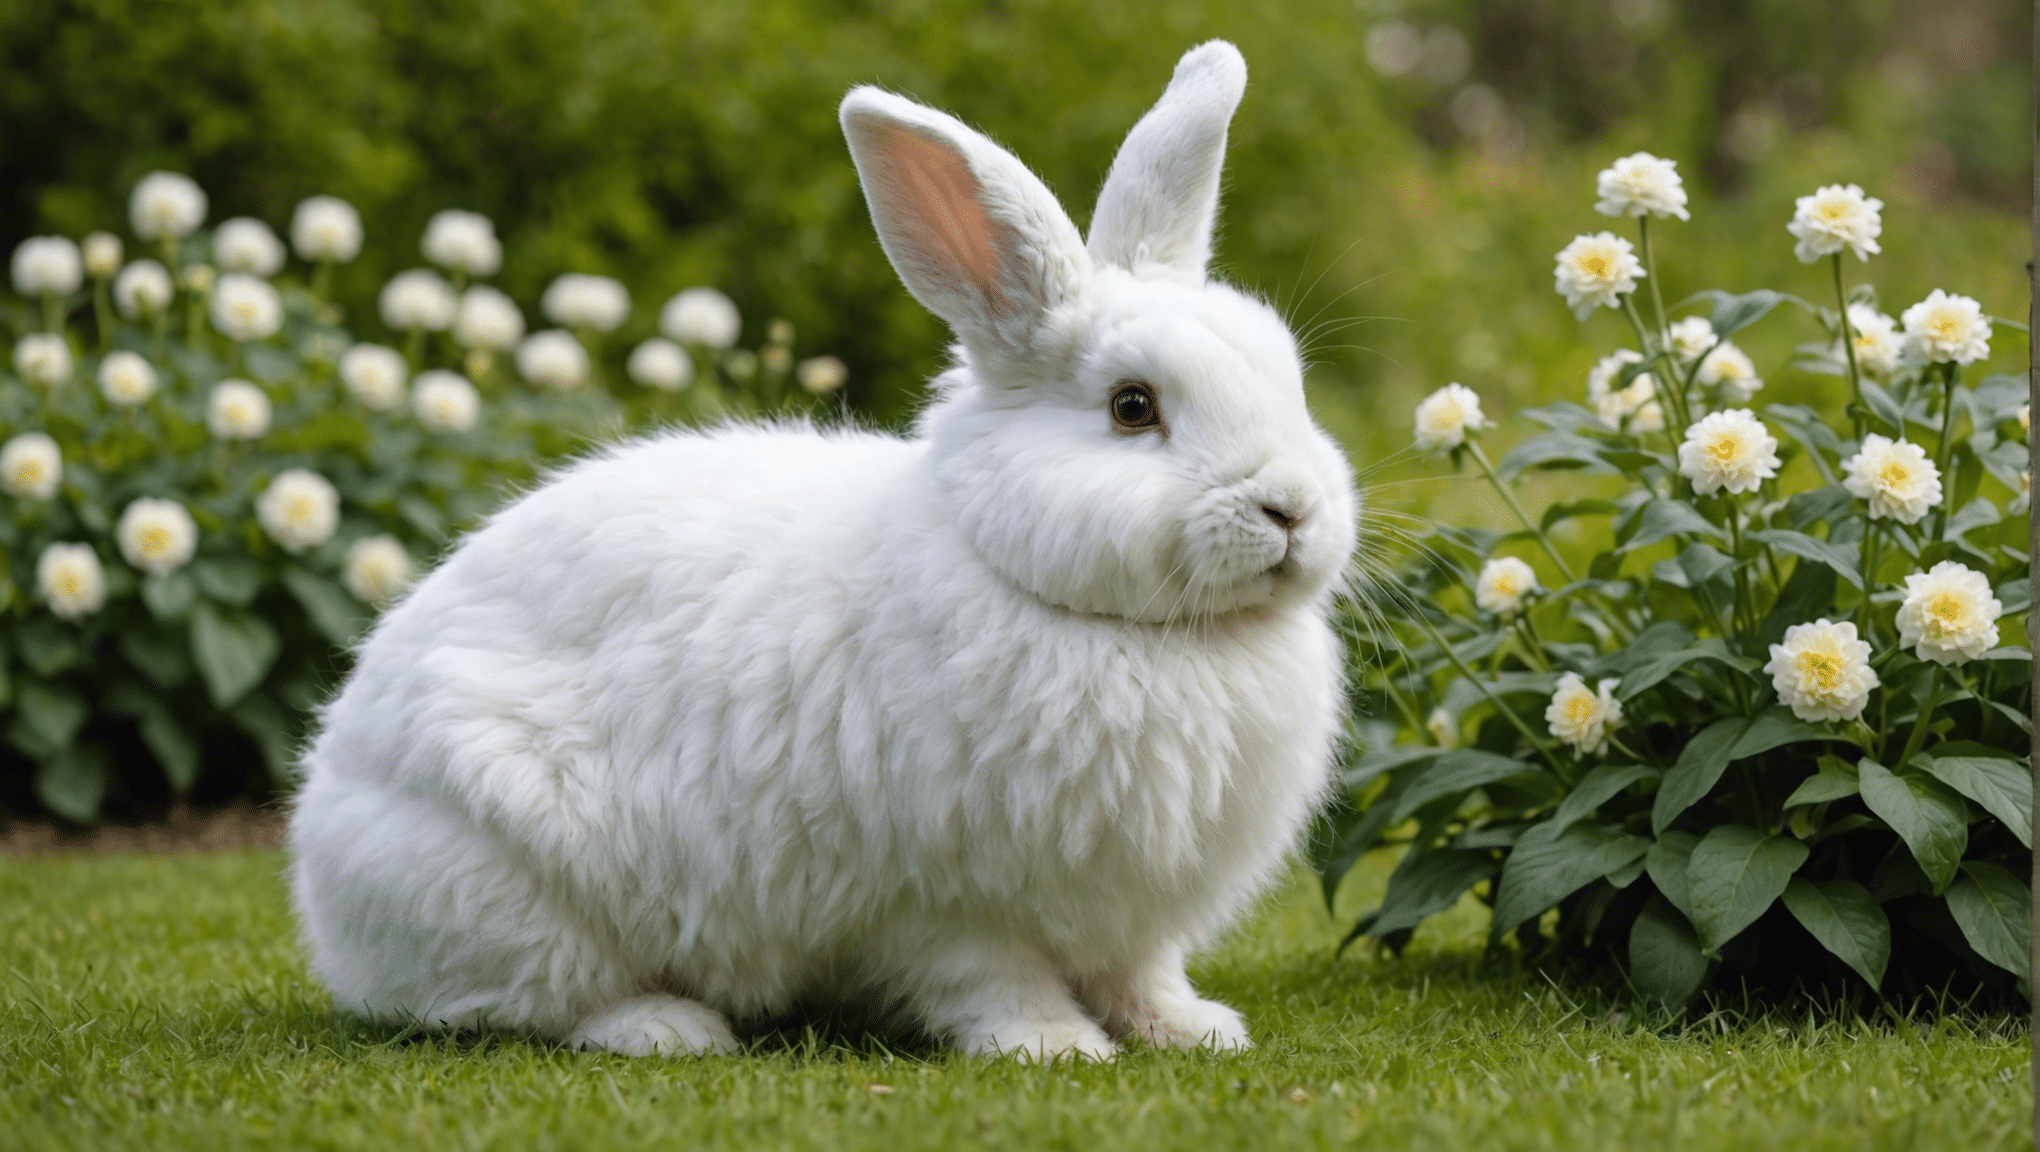 learn about the behavior of angora rabbits and their characteristics in this informative article.